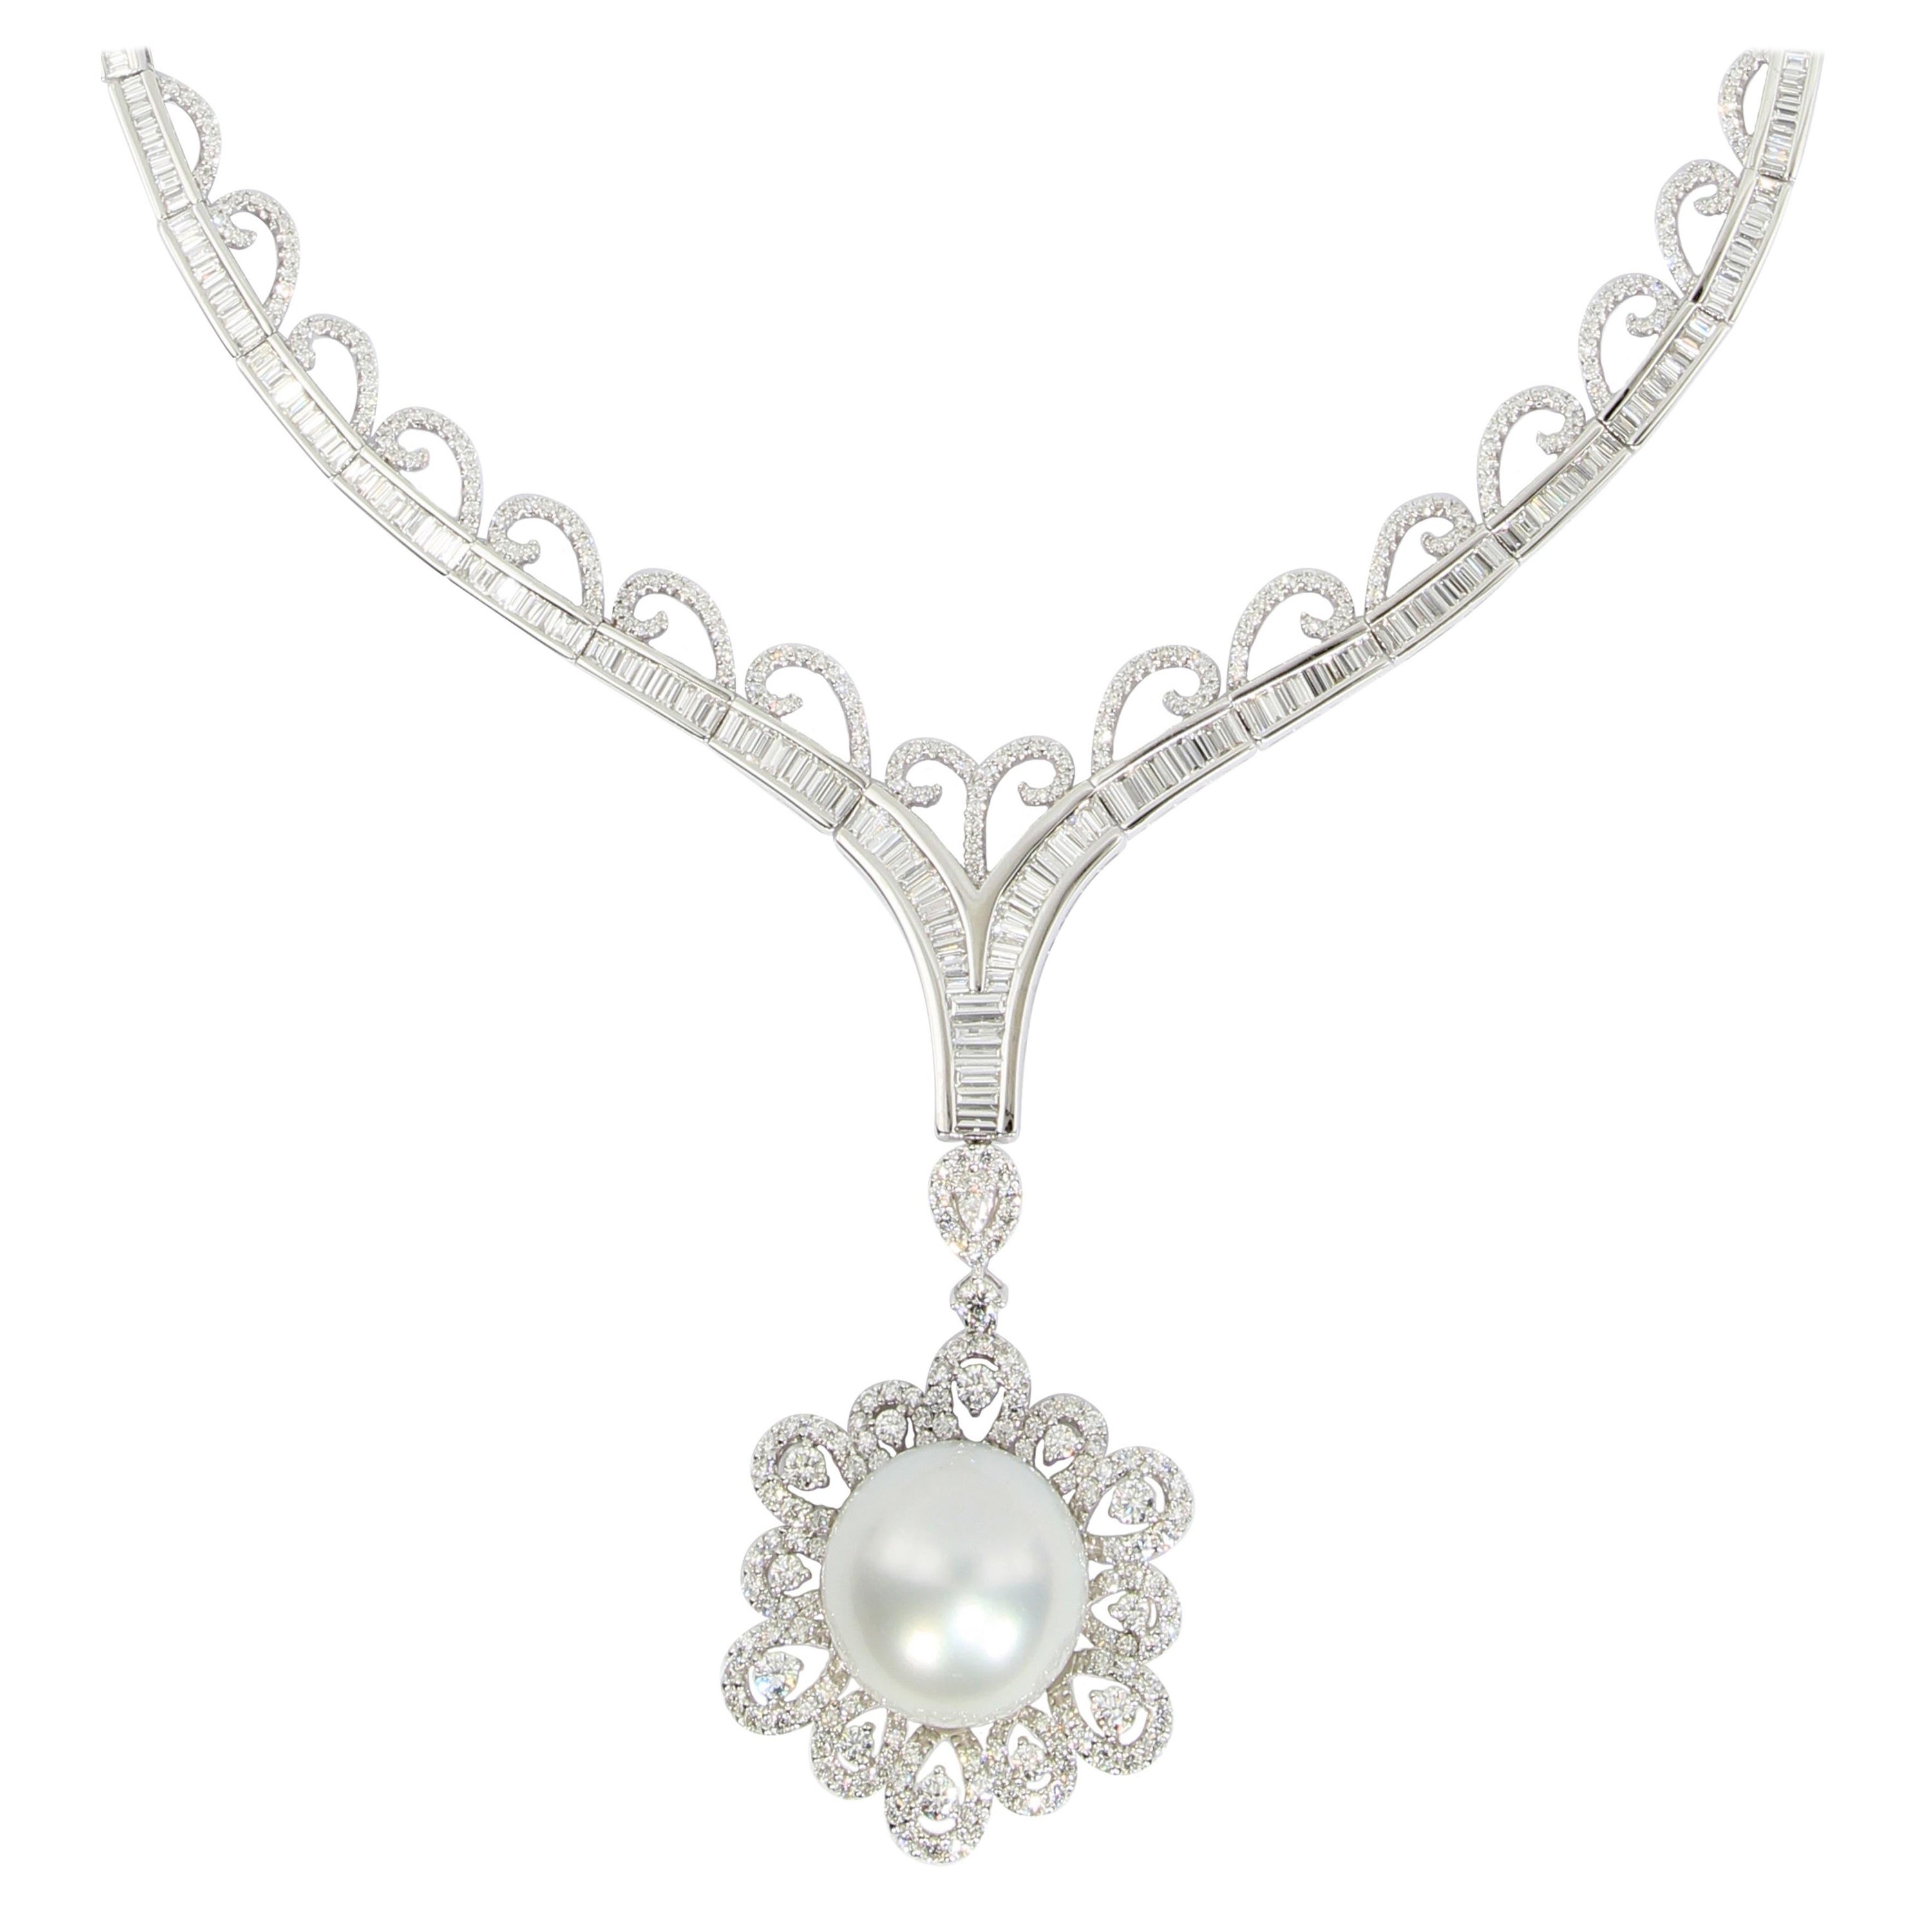 Huge South Sea Pearl Pendant with Diamond Neclace in 18K Gold